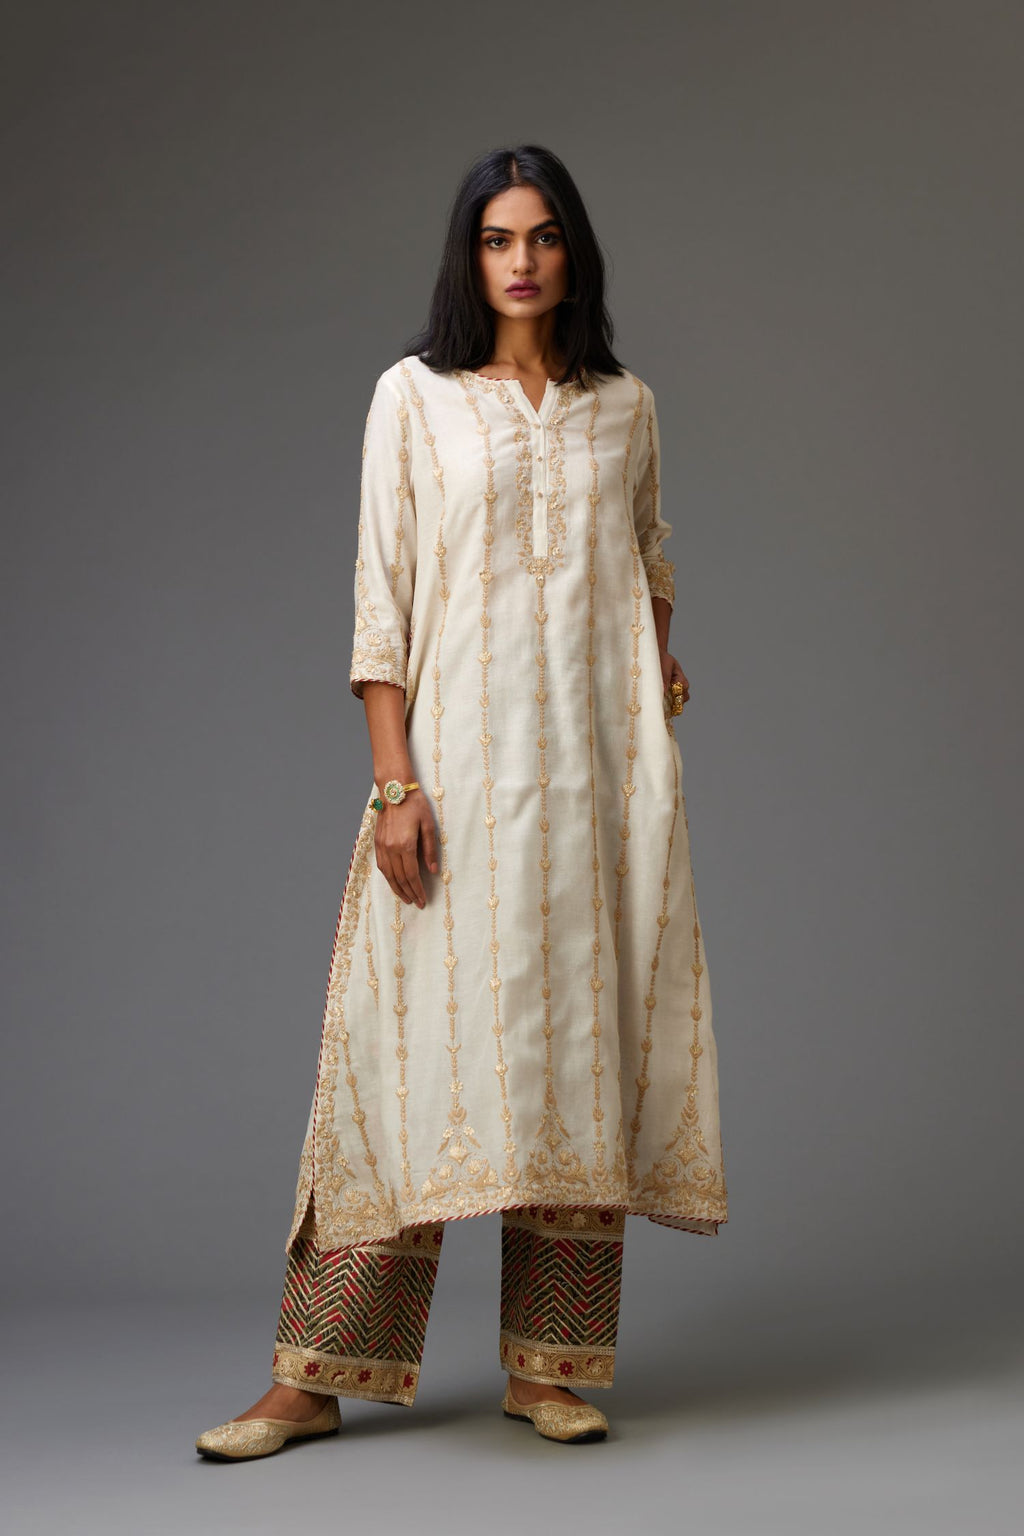 Off white cotton chanderi straight kurta set with all over heavy dori and gota embroidery work, highlighted with gold sequin work.